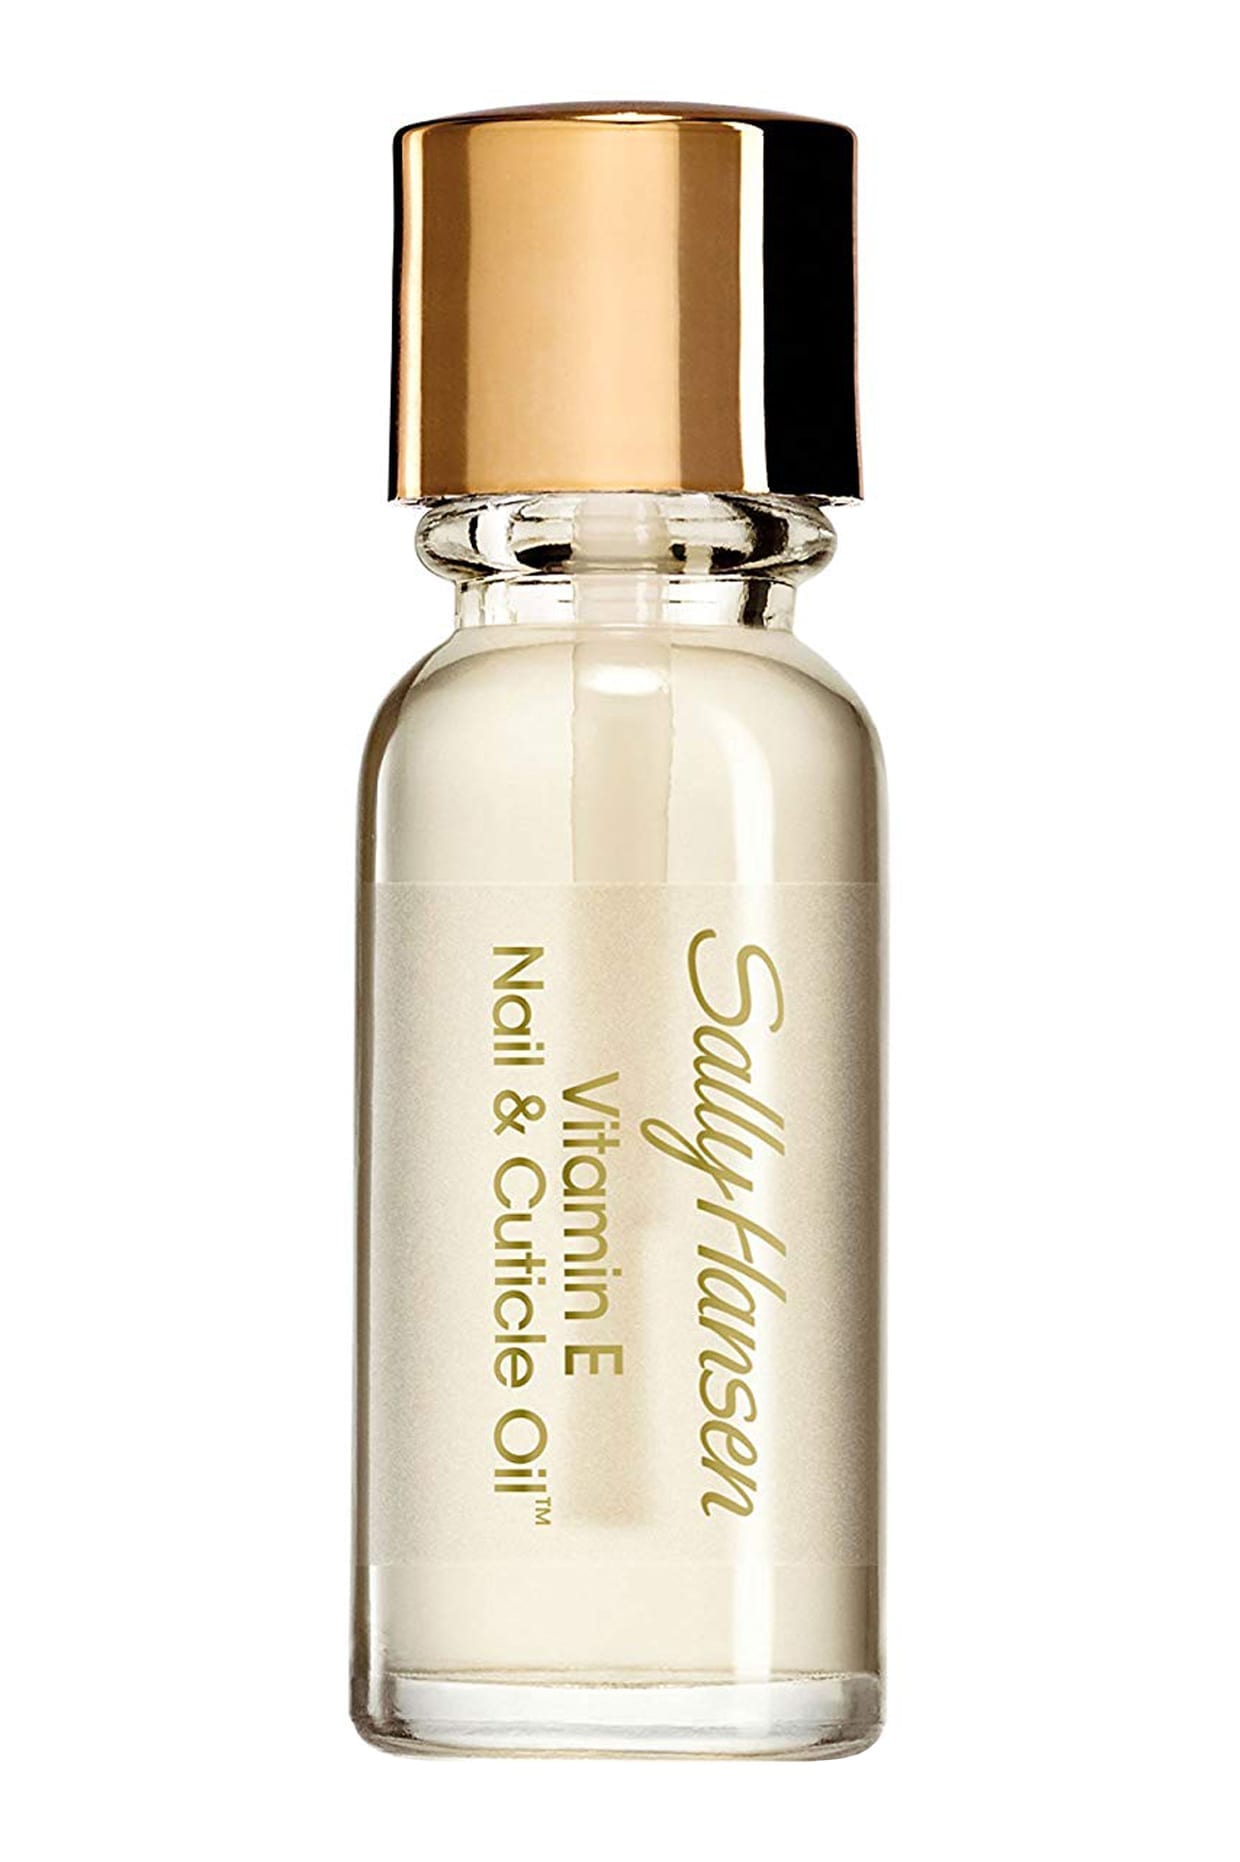 A bottle of cuticle and nail Vitamin E oil.